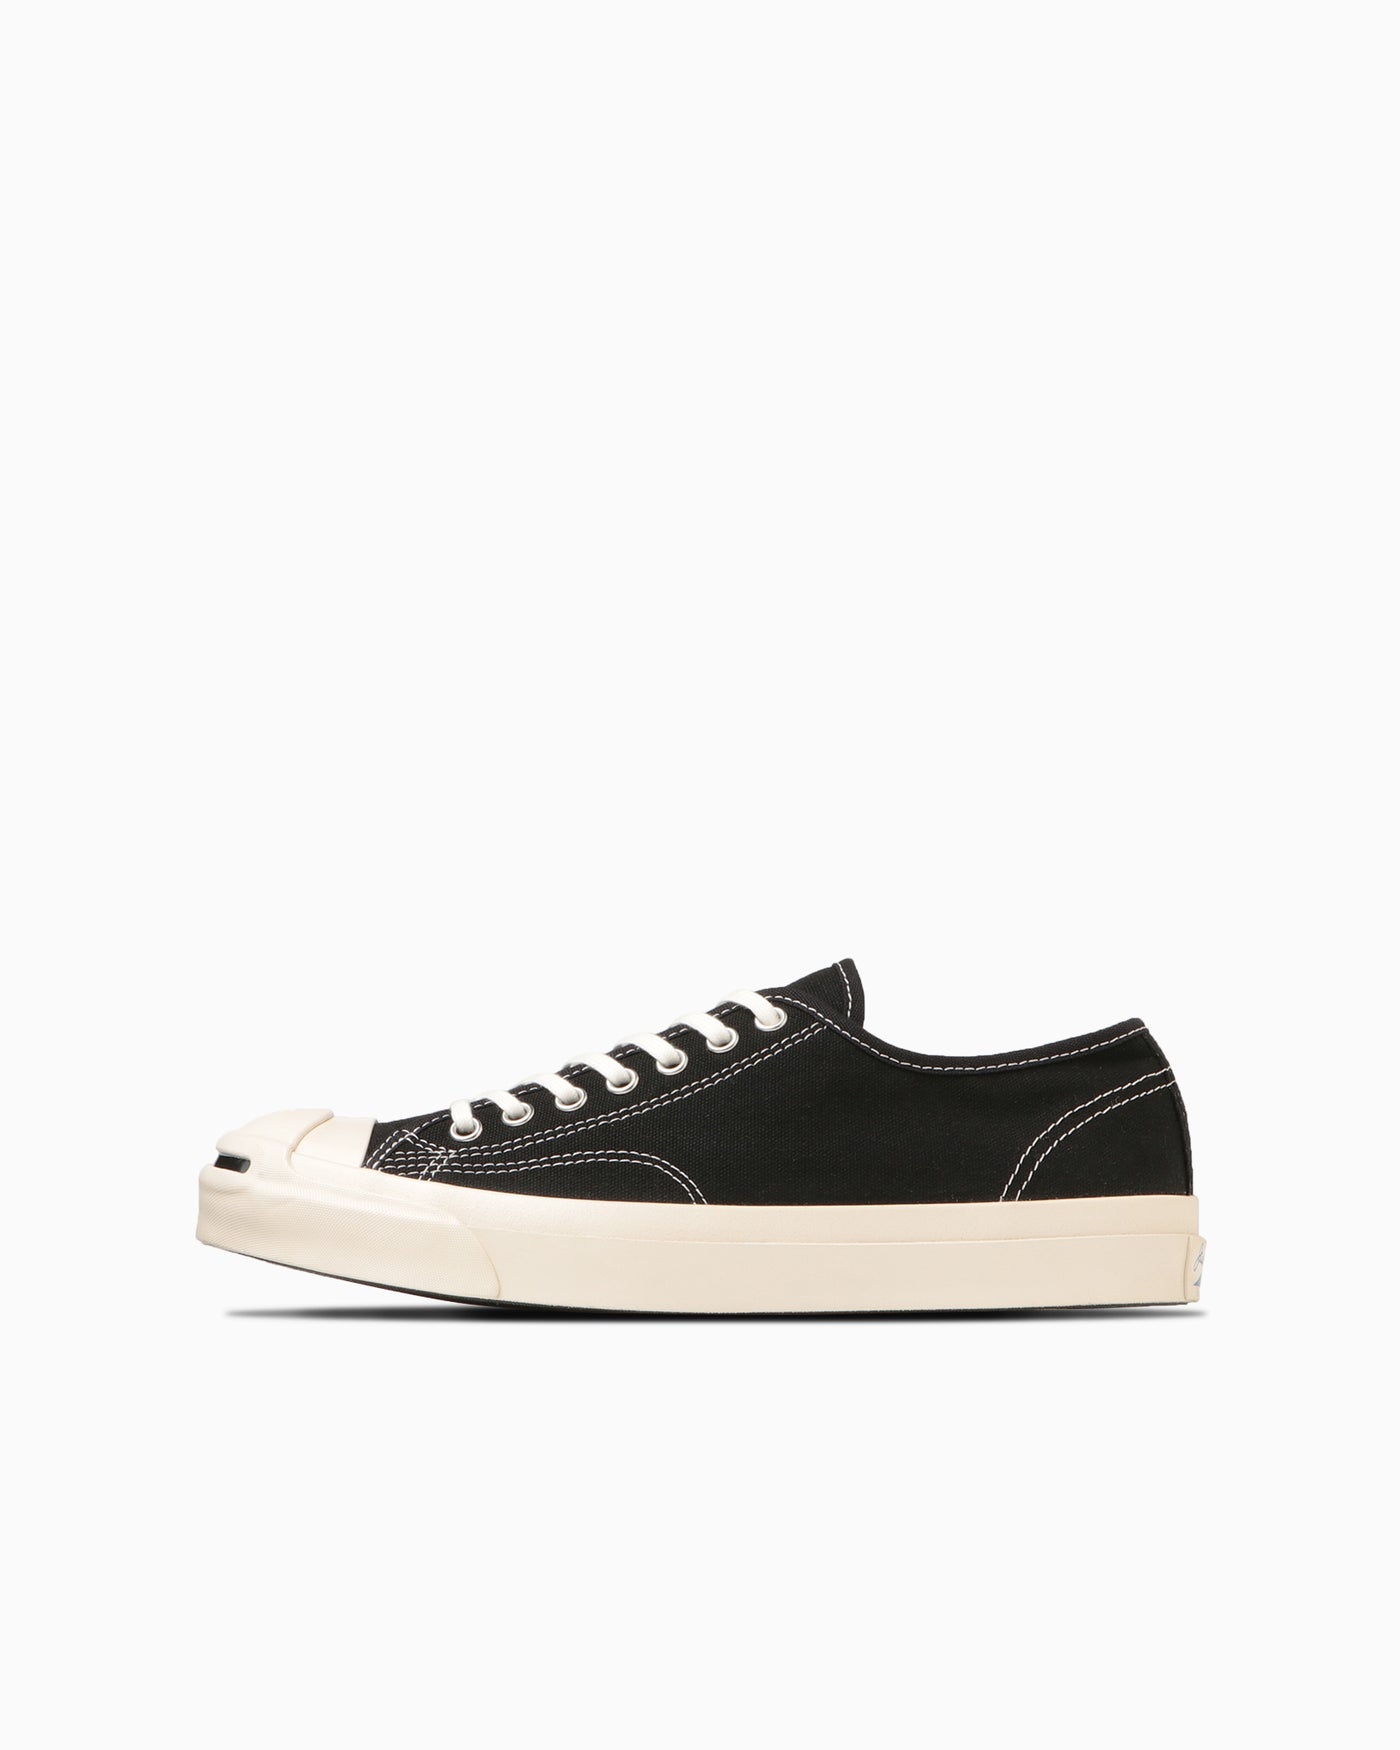 JACK PURCELL US